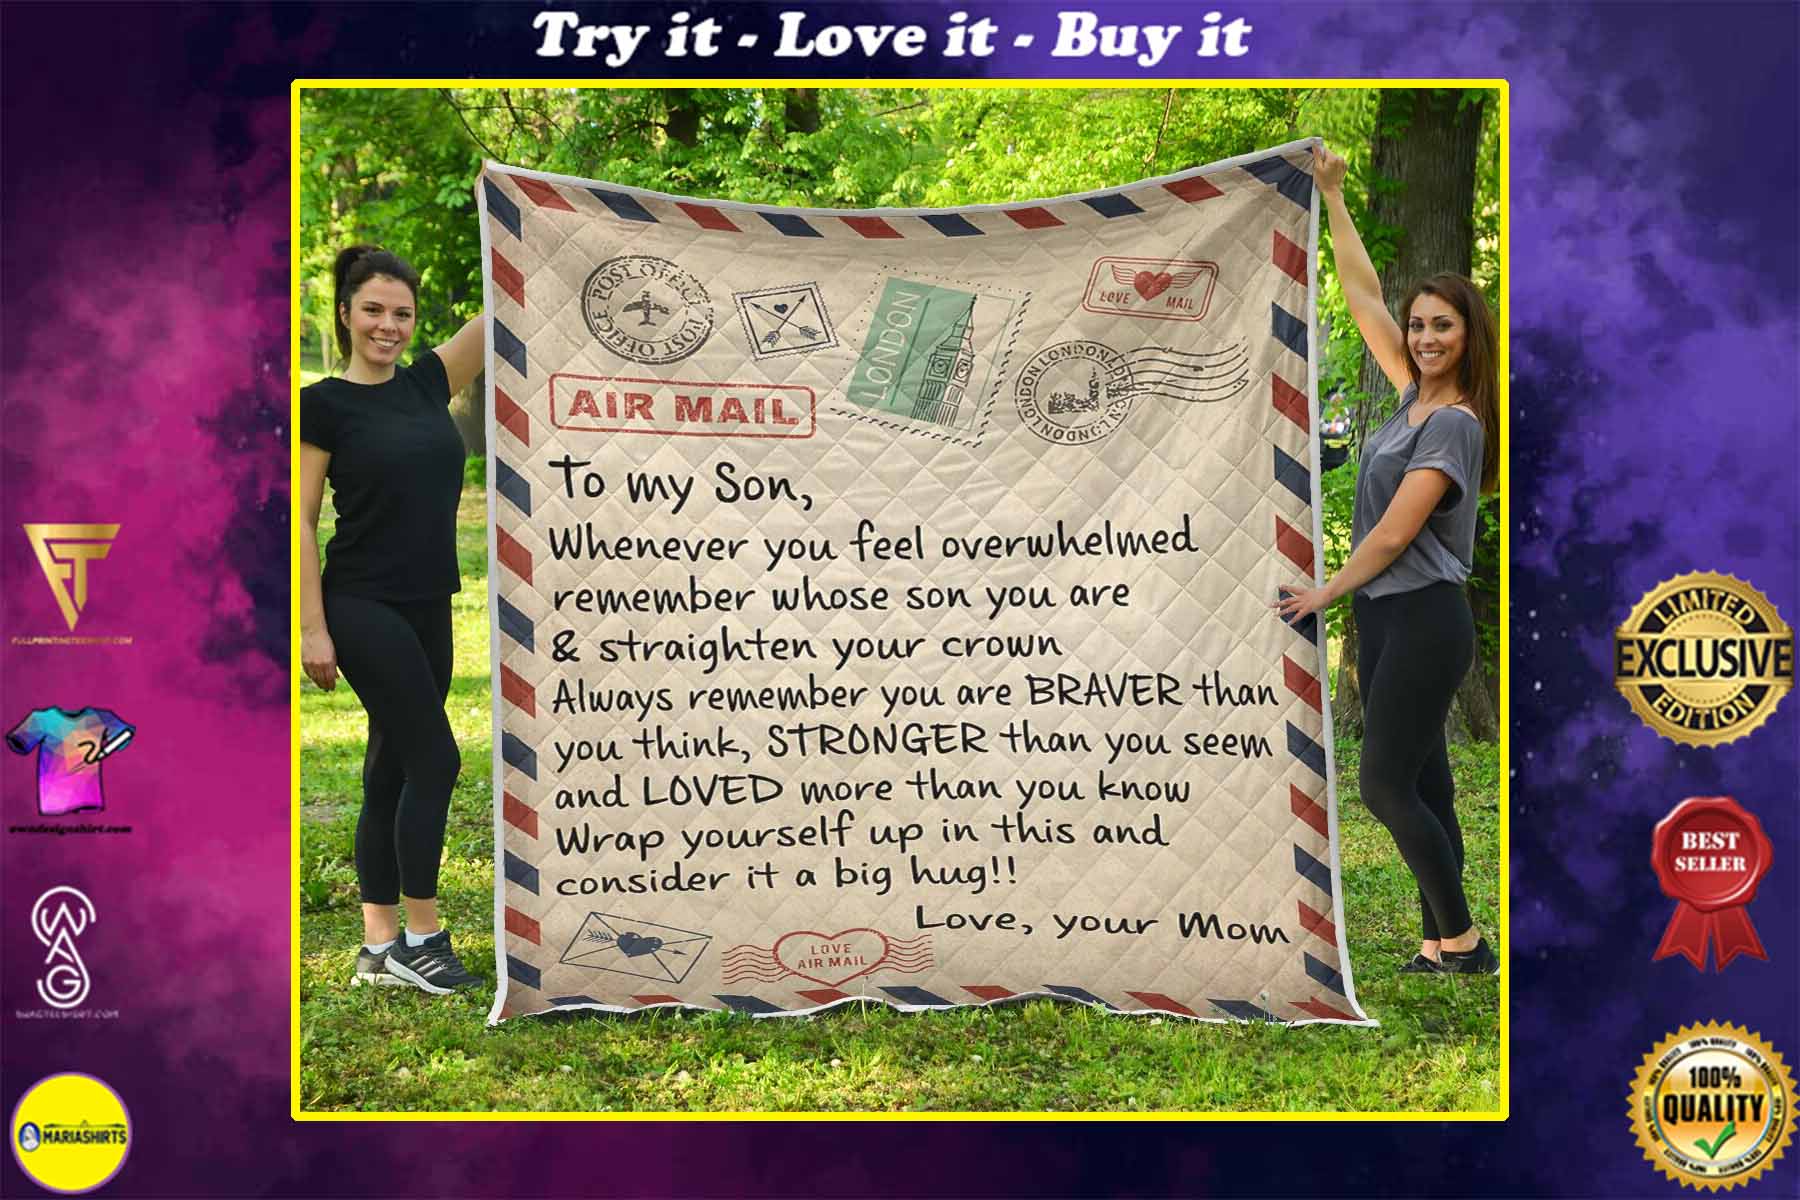 air mail letter to my son always remember you are braver than you think your mom quilt